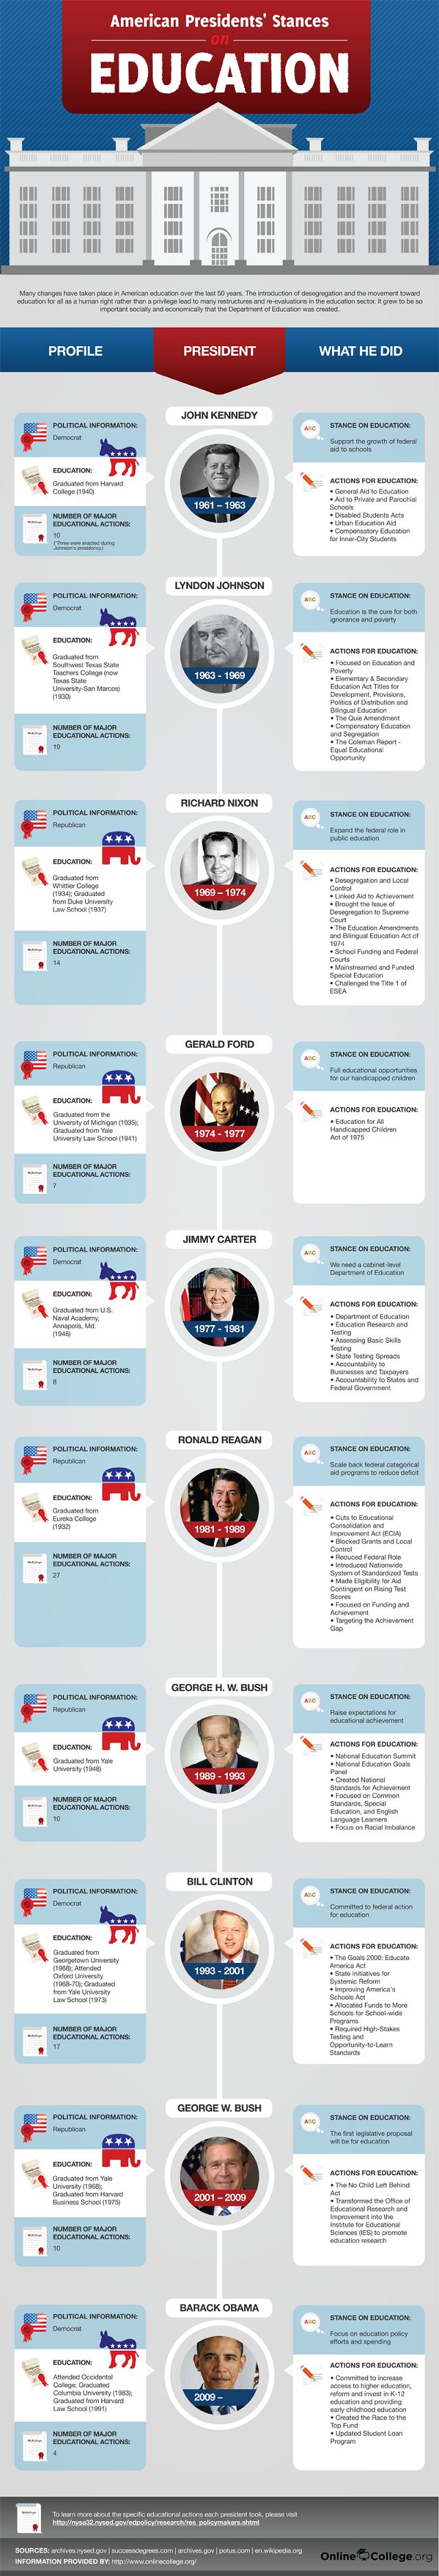 American Presidents’ Stances on Education